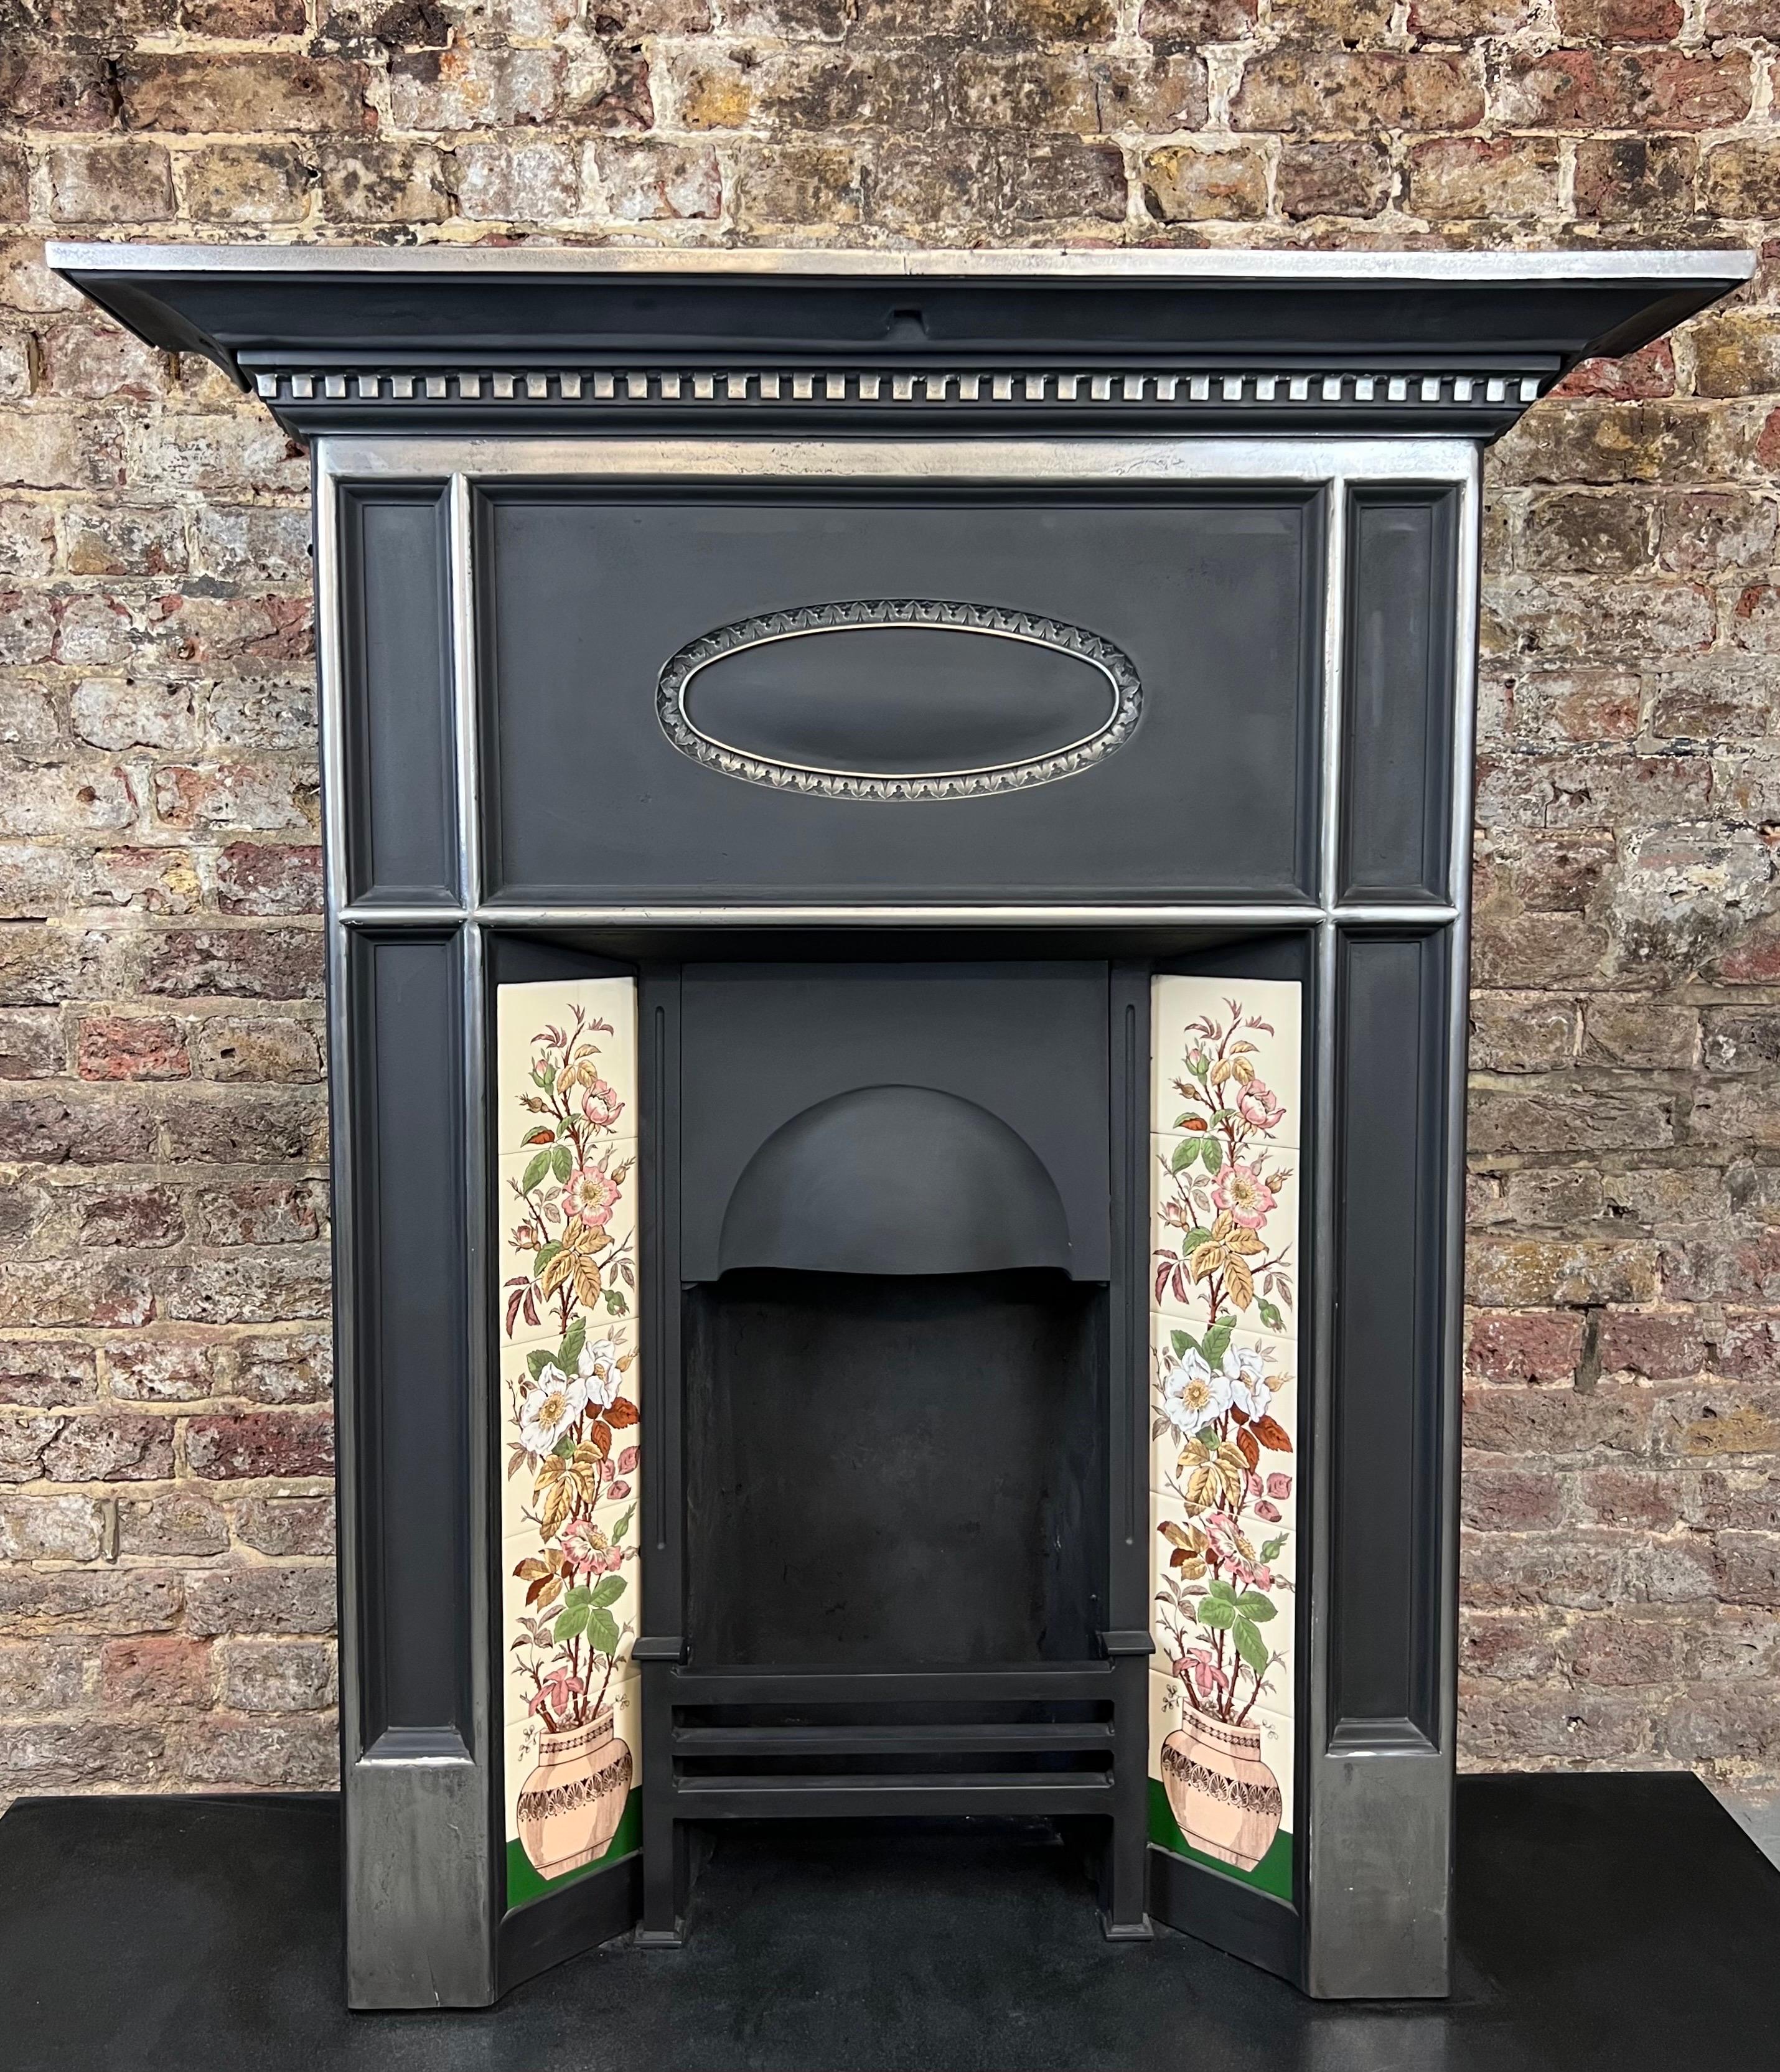 19th century cast iron tiled fireplace combination fireplace.
Late Victorian fireplace complete with canopy, front bars, hood in a
highlight burnished finish. Included is a full set of 10 English wild rose tiles. (5 on each side) recently salvaged